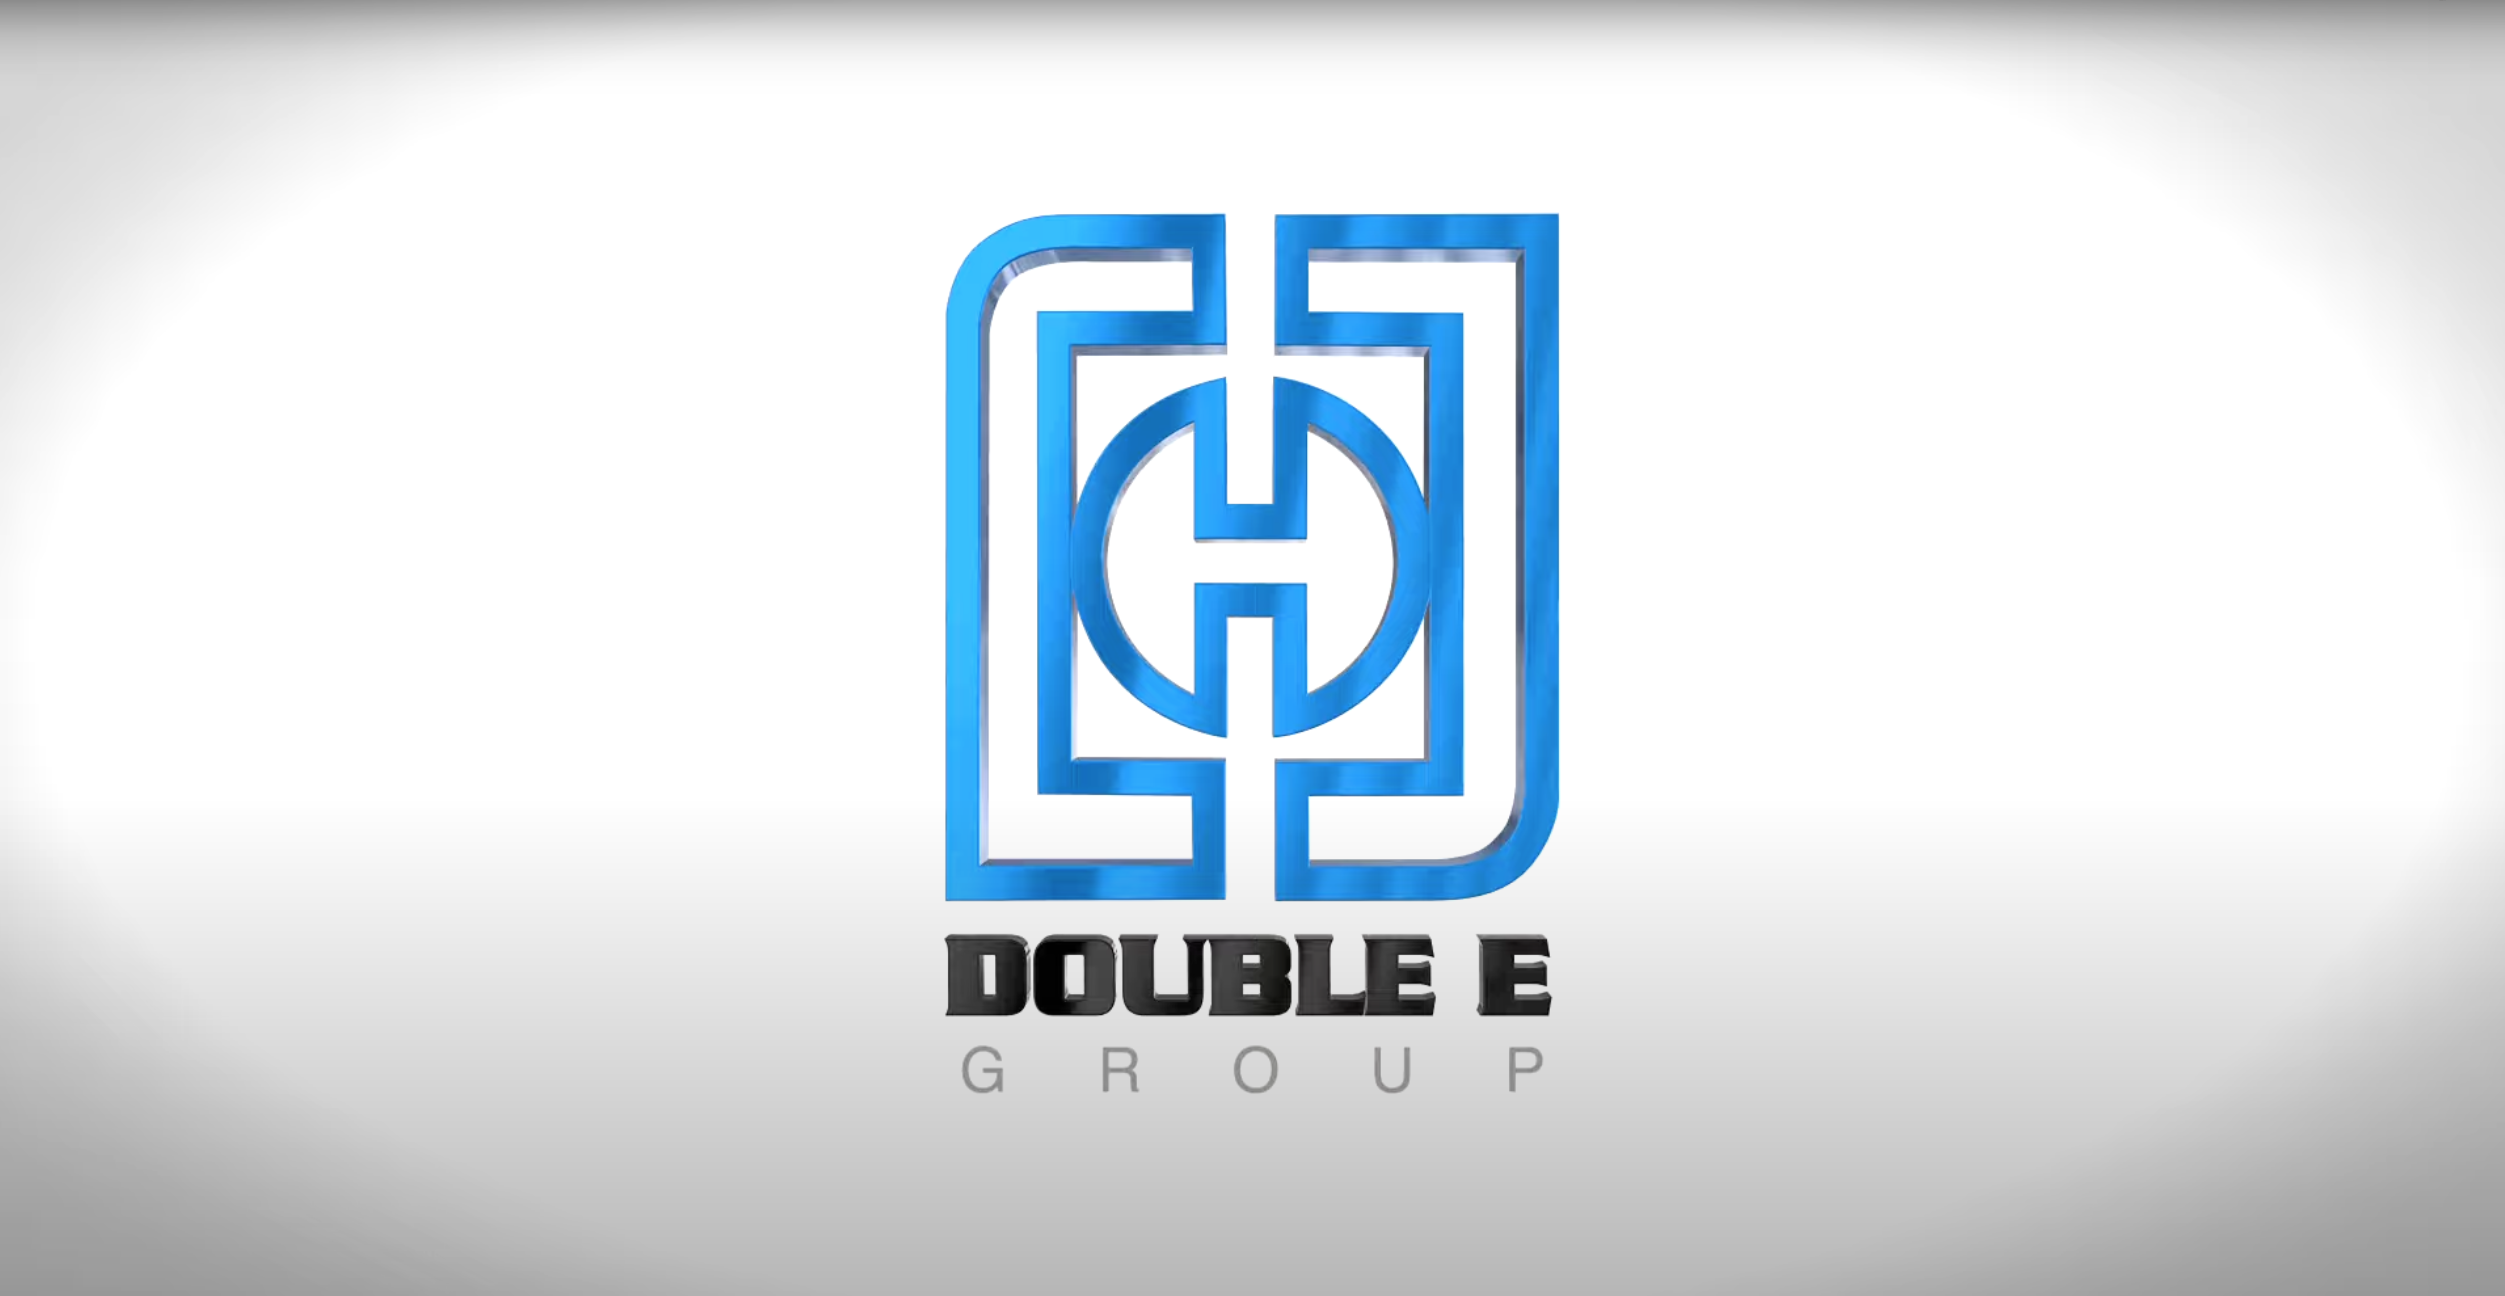 Double E Group Overview